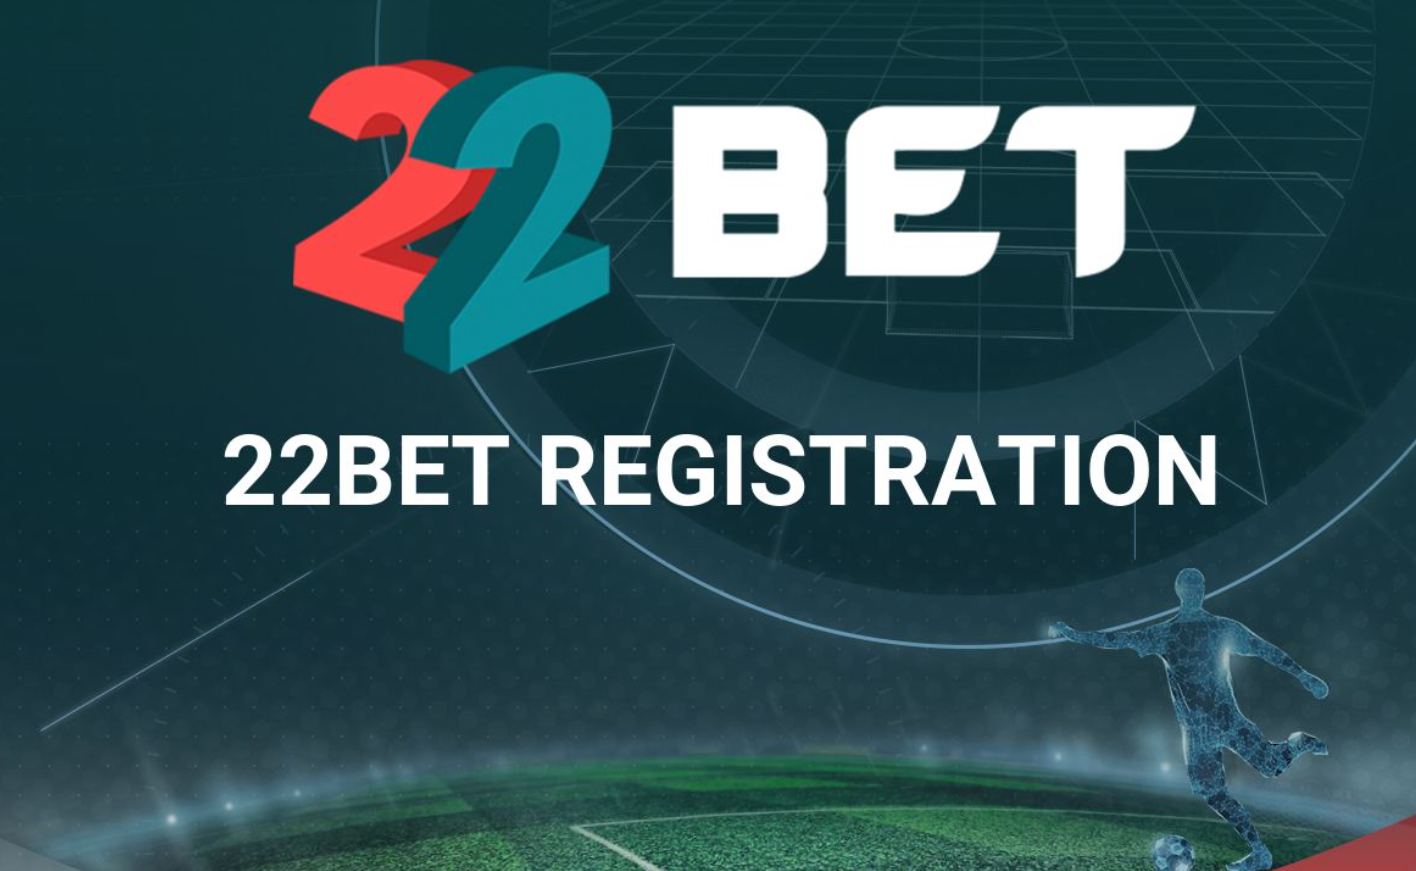 Why may 22bet account login not work in Tanzania?